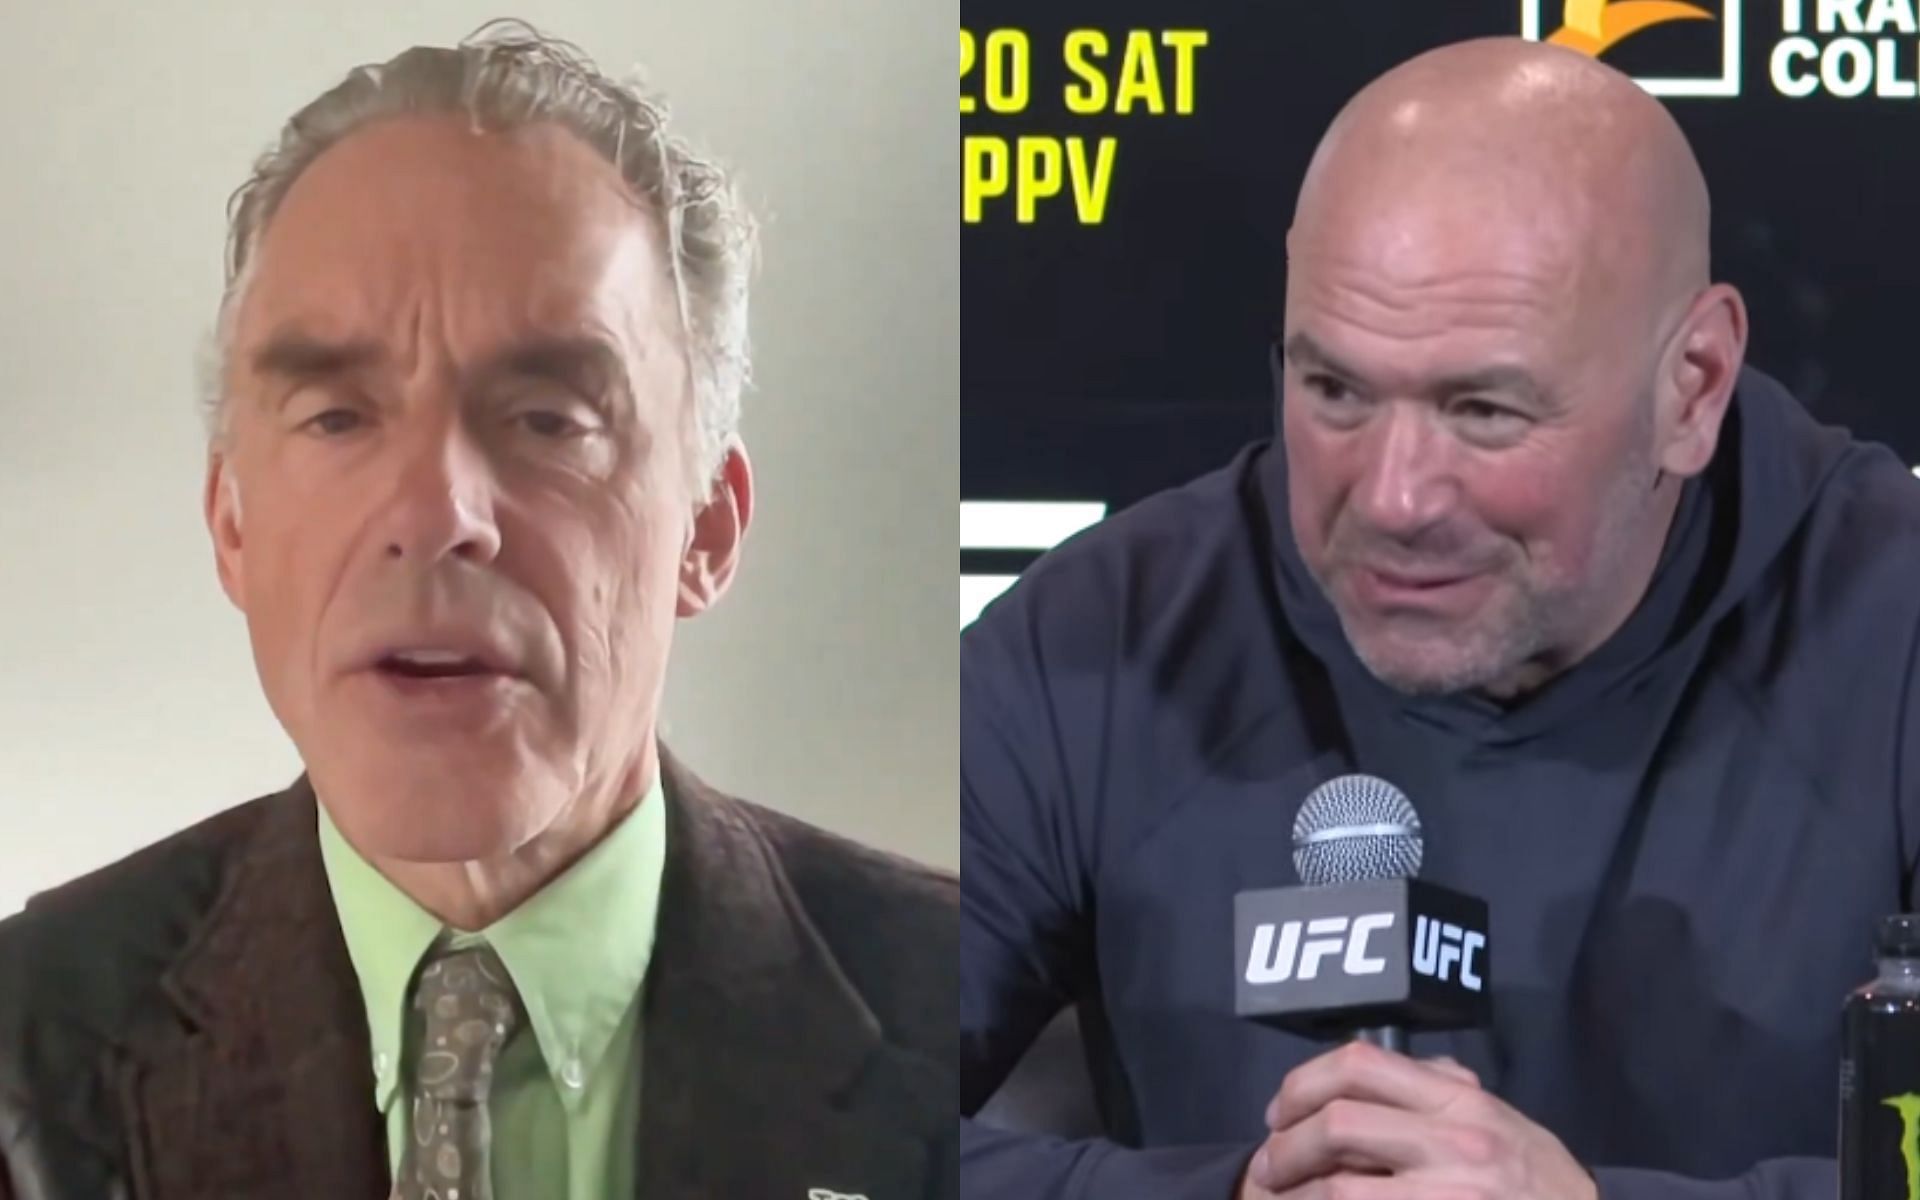 Jordan Peterson [Left] praised Dana White [RIght] for how he handled reporter at UFC 297 post-fight press conference [Image courtesy: @jordanbpeterson - X, and UFC - YouTube]